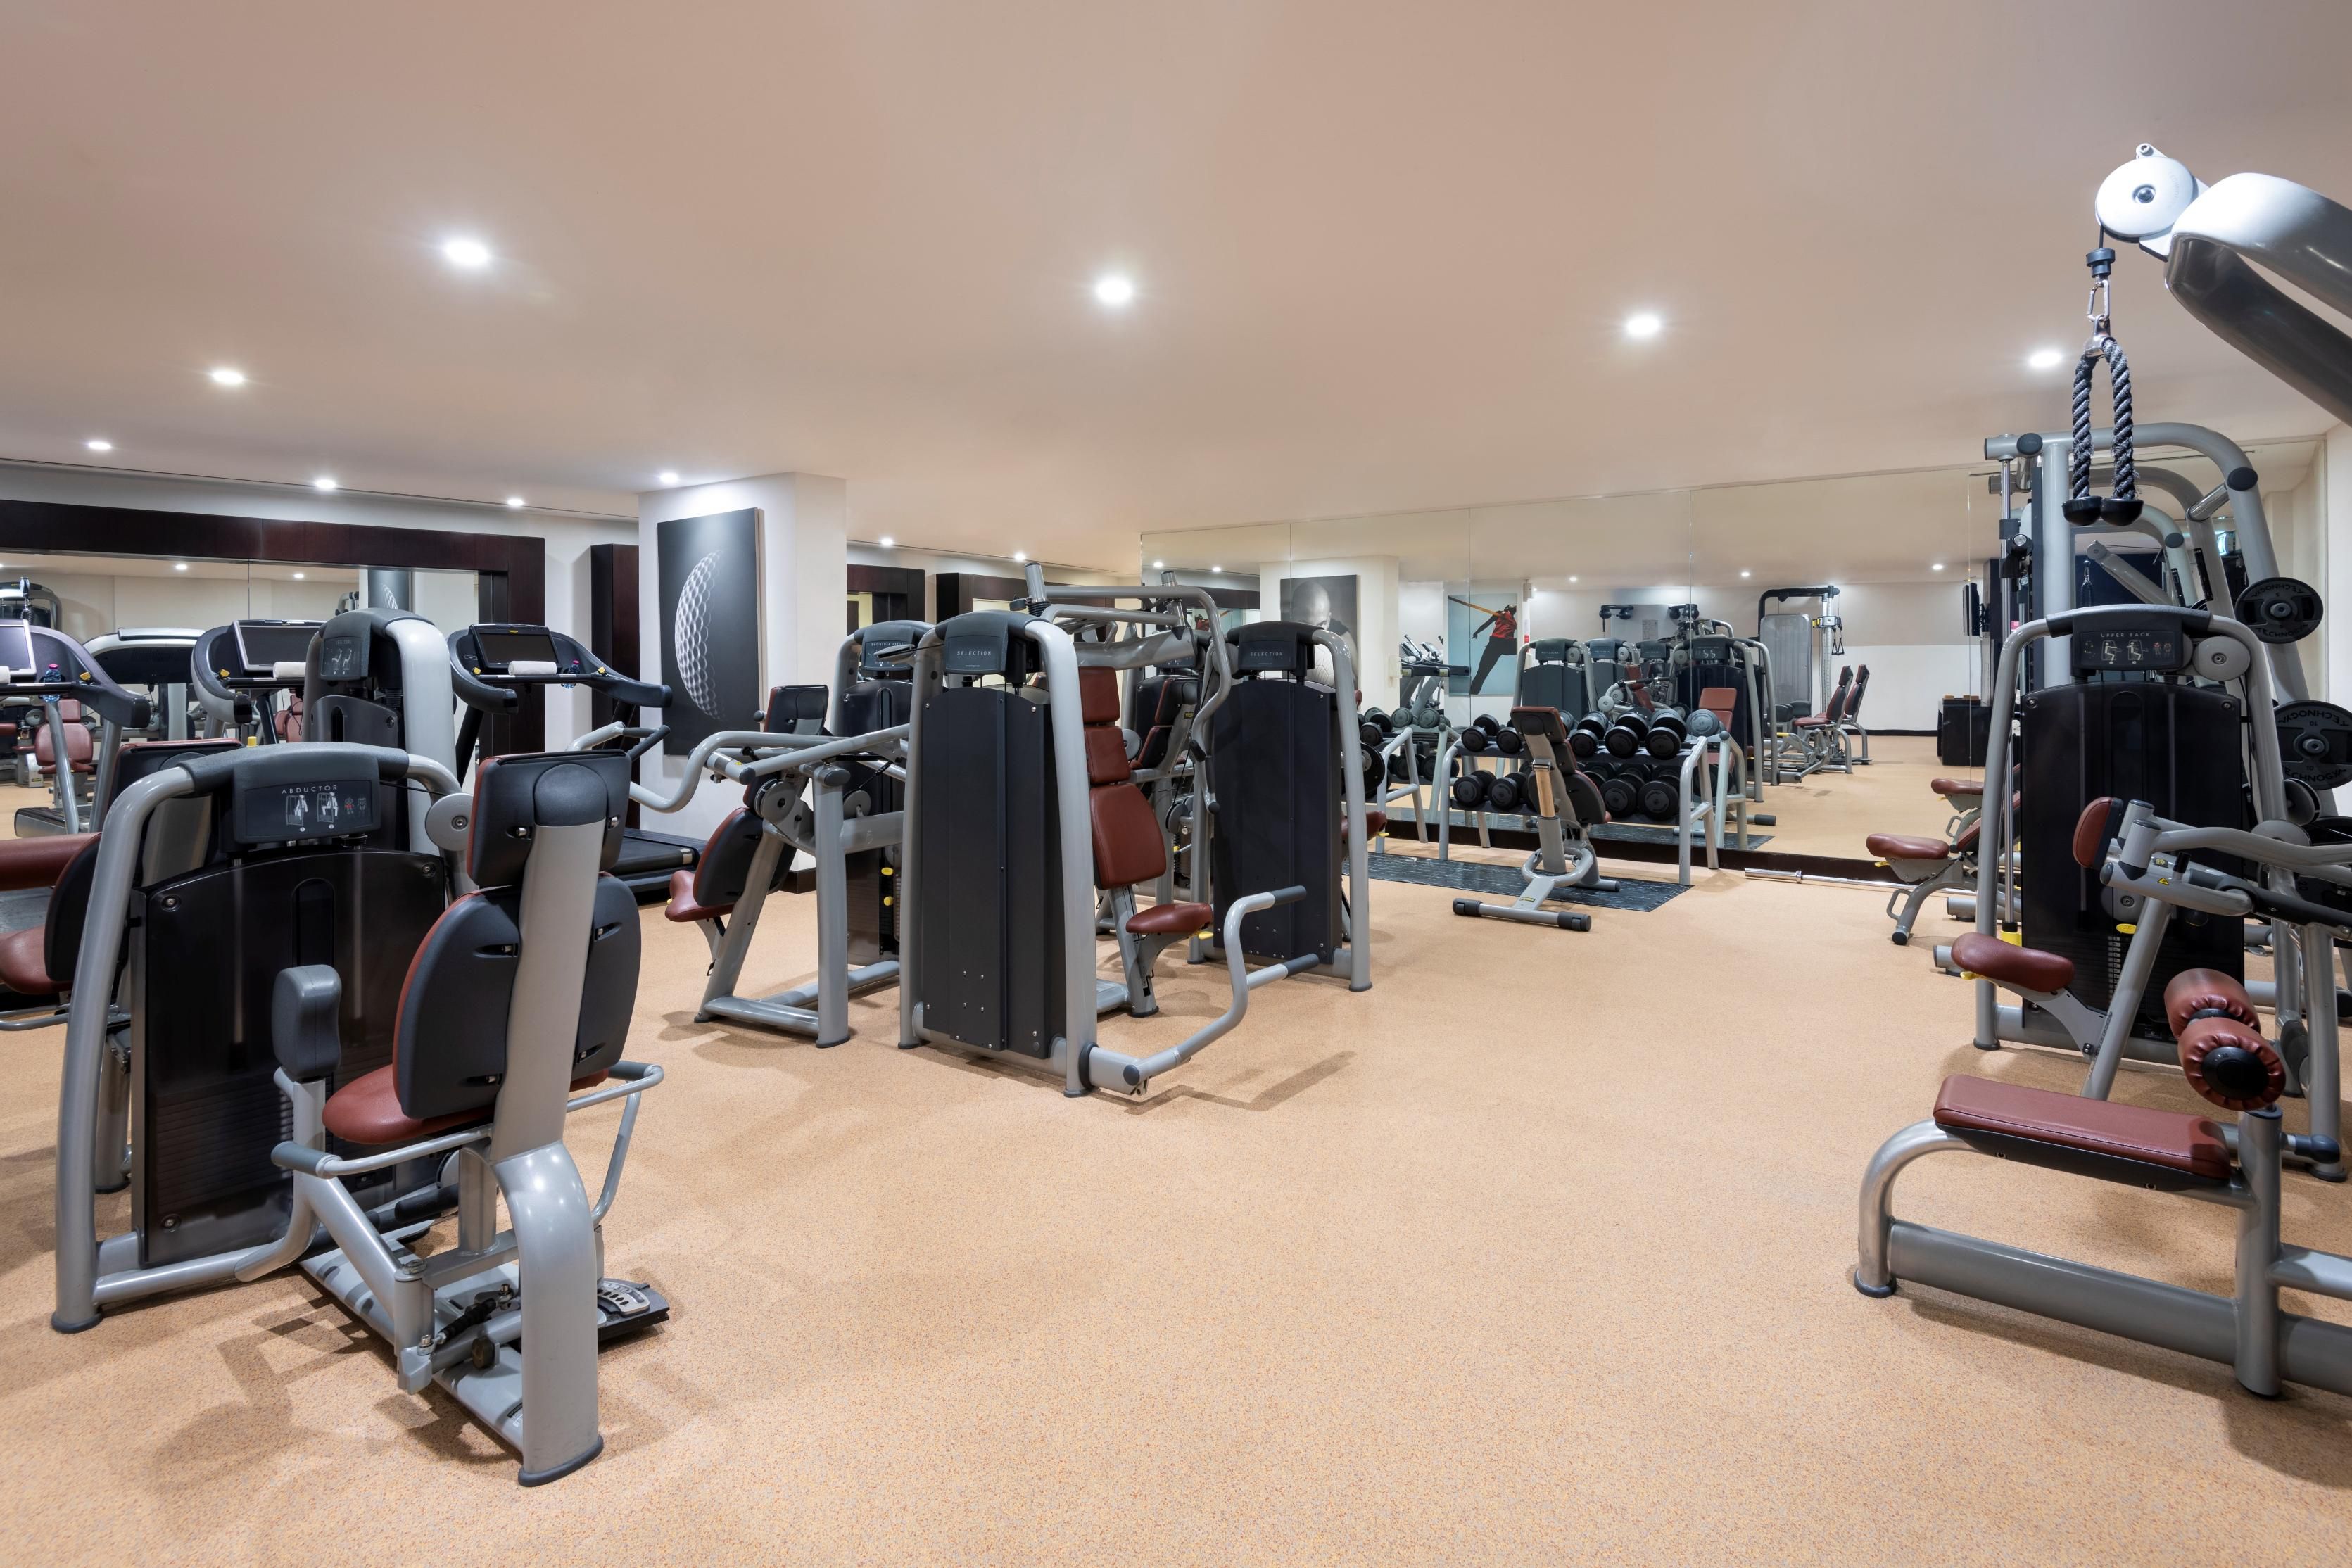 Our on-site fitness centre is equipped with modern equipment